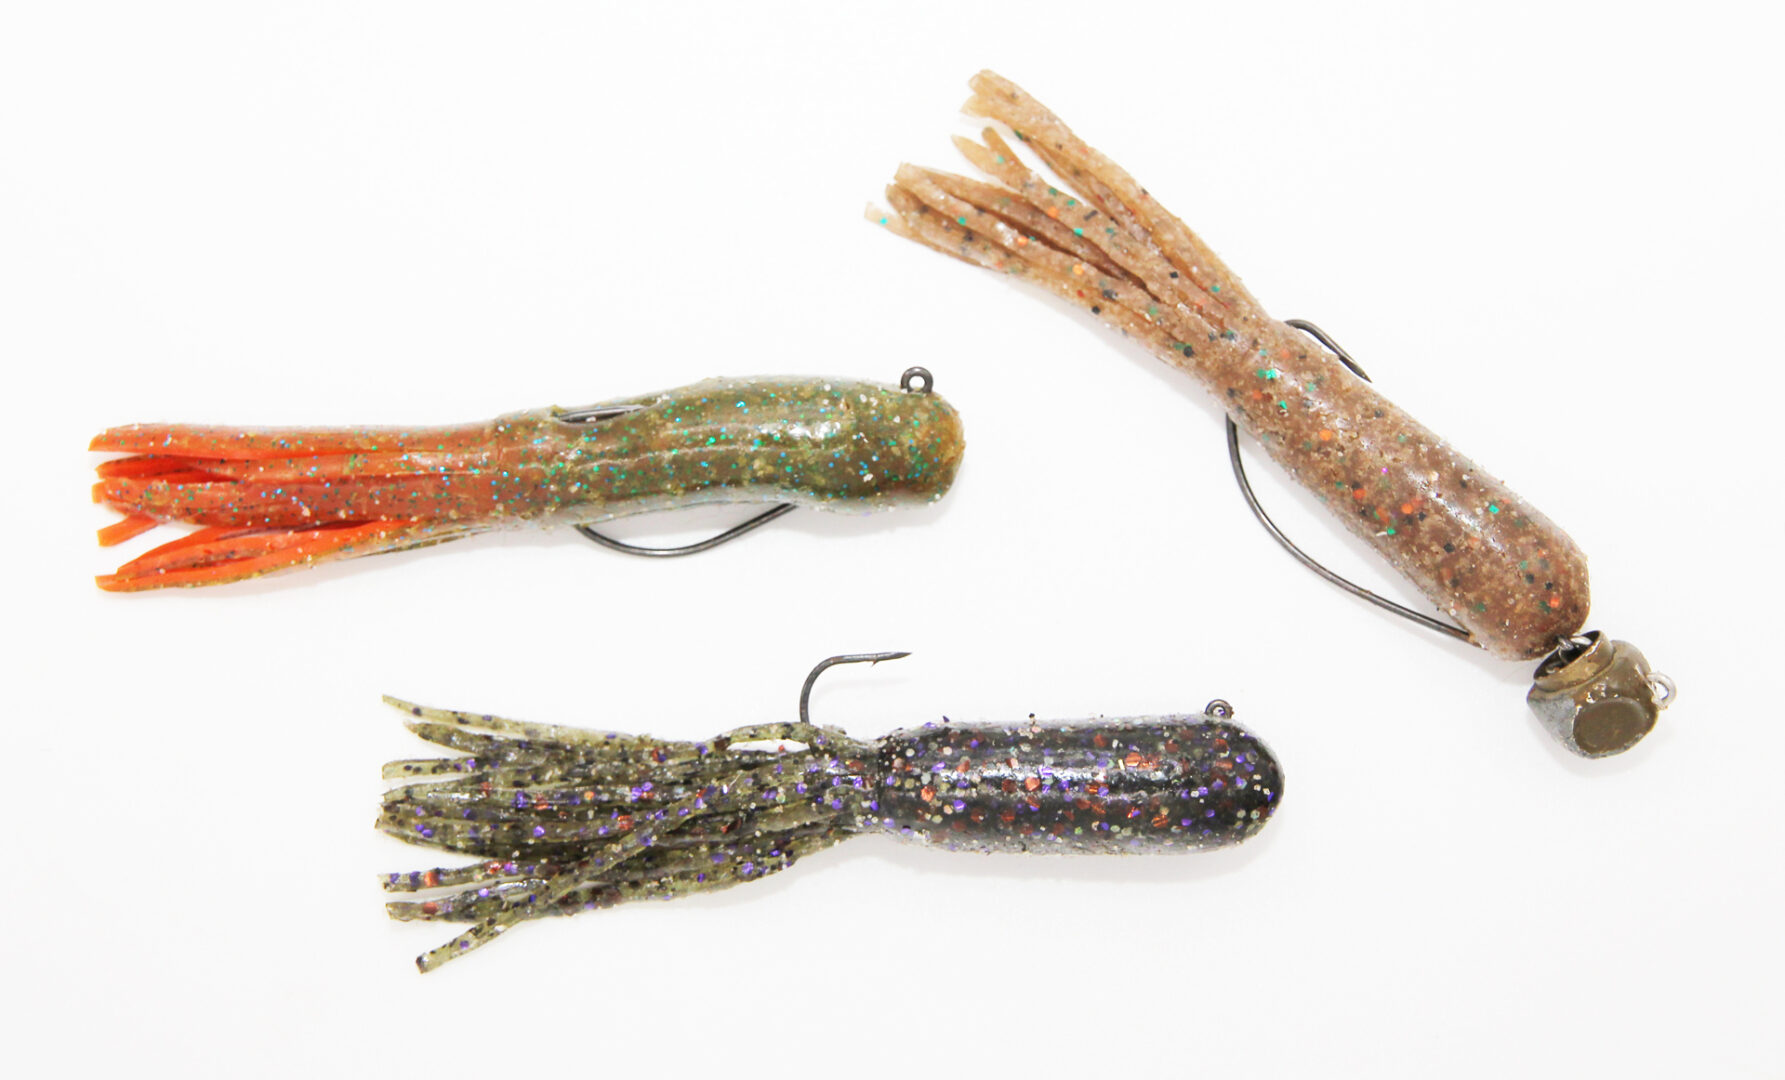 Why You Should Pre-Scent Soft Plastic Lures